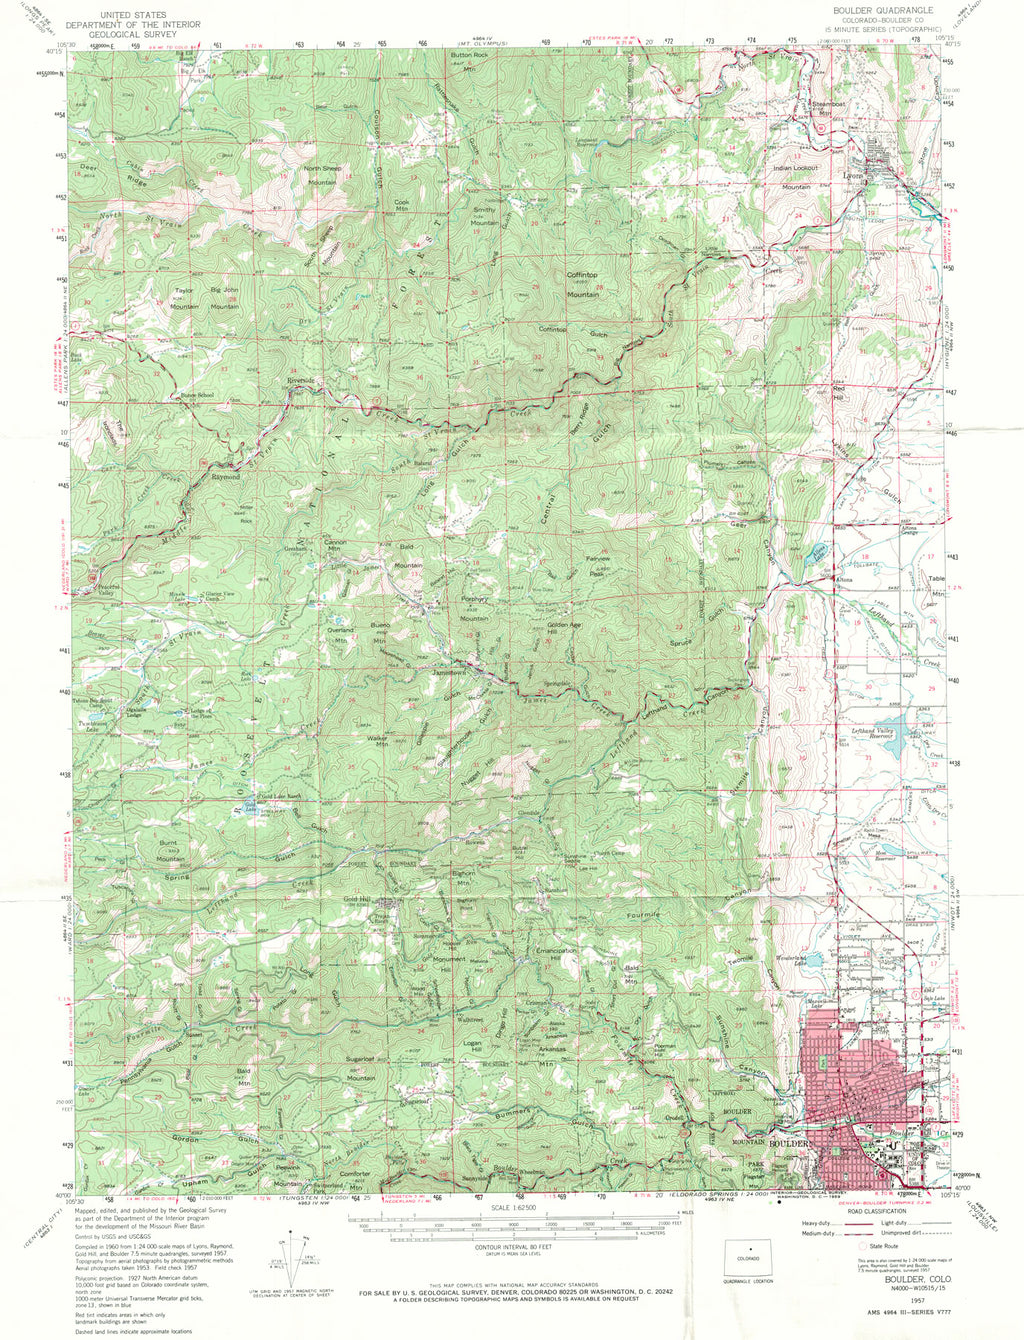 (CO. - Boulder - Lyons) Boulder Quadrangle, U.S.G.S., 1957  Showing most of the grid of the town of Boulder in the lower right, this map reaches into the nearby mountains from Sugarloaf and Gold Hill, up through Jamestown, and on up to Lyons and the towns just along the nearby hills. Shows a wealth of detail towns, roads and railroads as well as terrain and drainages. A great reference. Condition is very good. Image size is approximately 20 x 14 (inches)